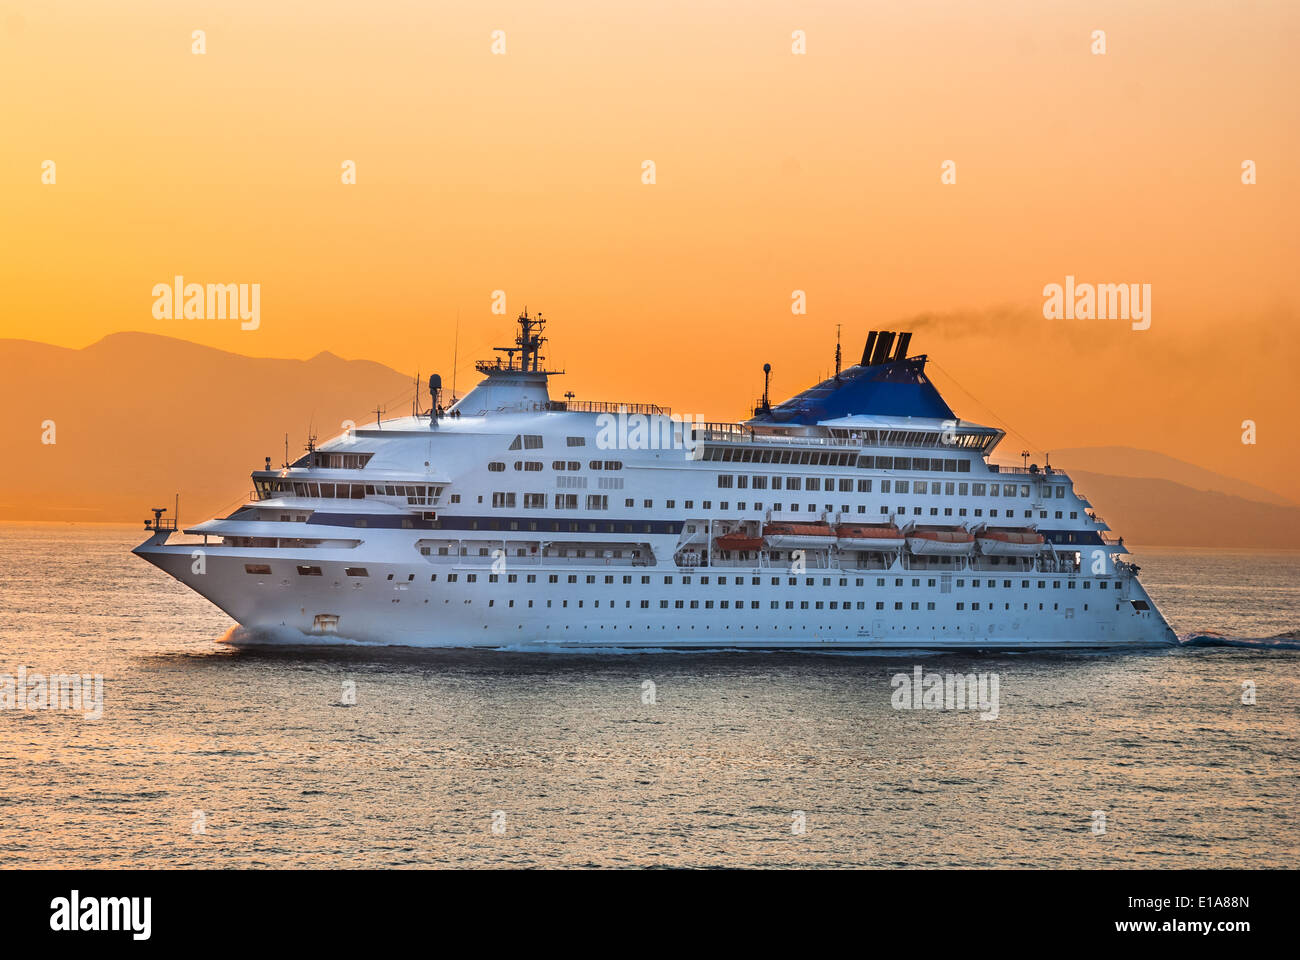 Image with one touristic cruise ship, taken on 17th September 2010, on Aegean Sea, Greek Islands. Stock Photo